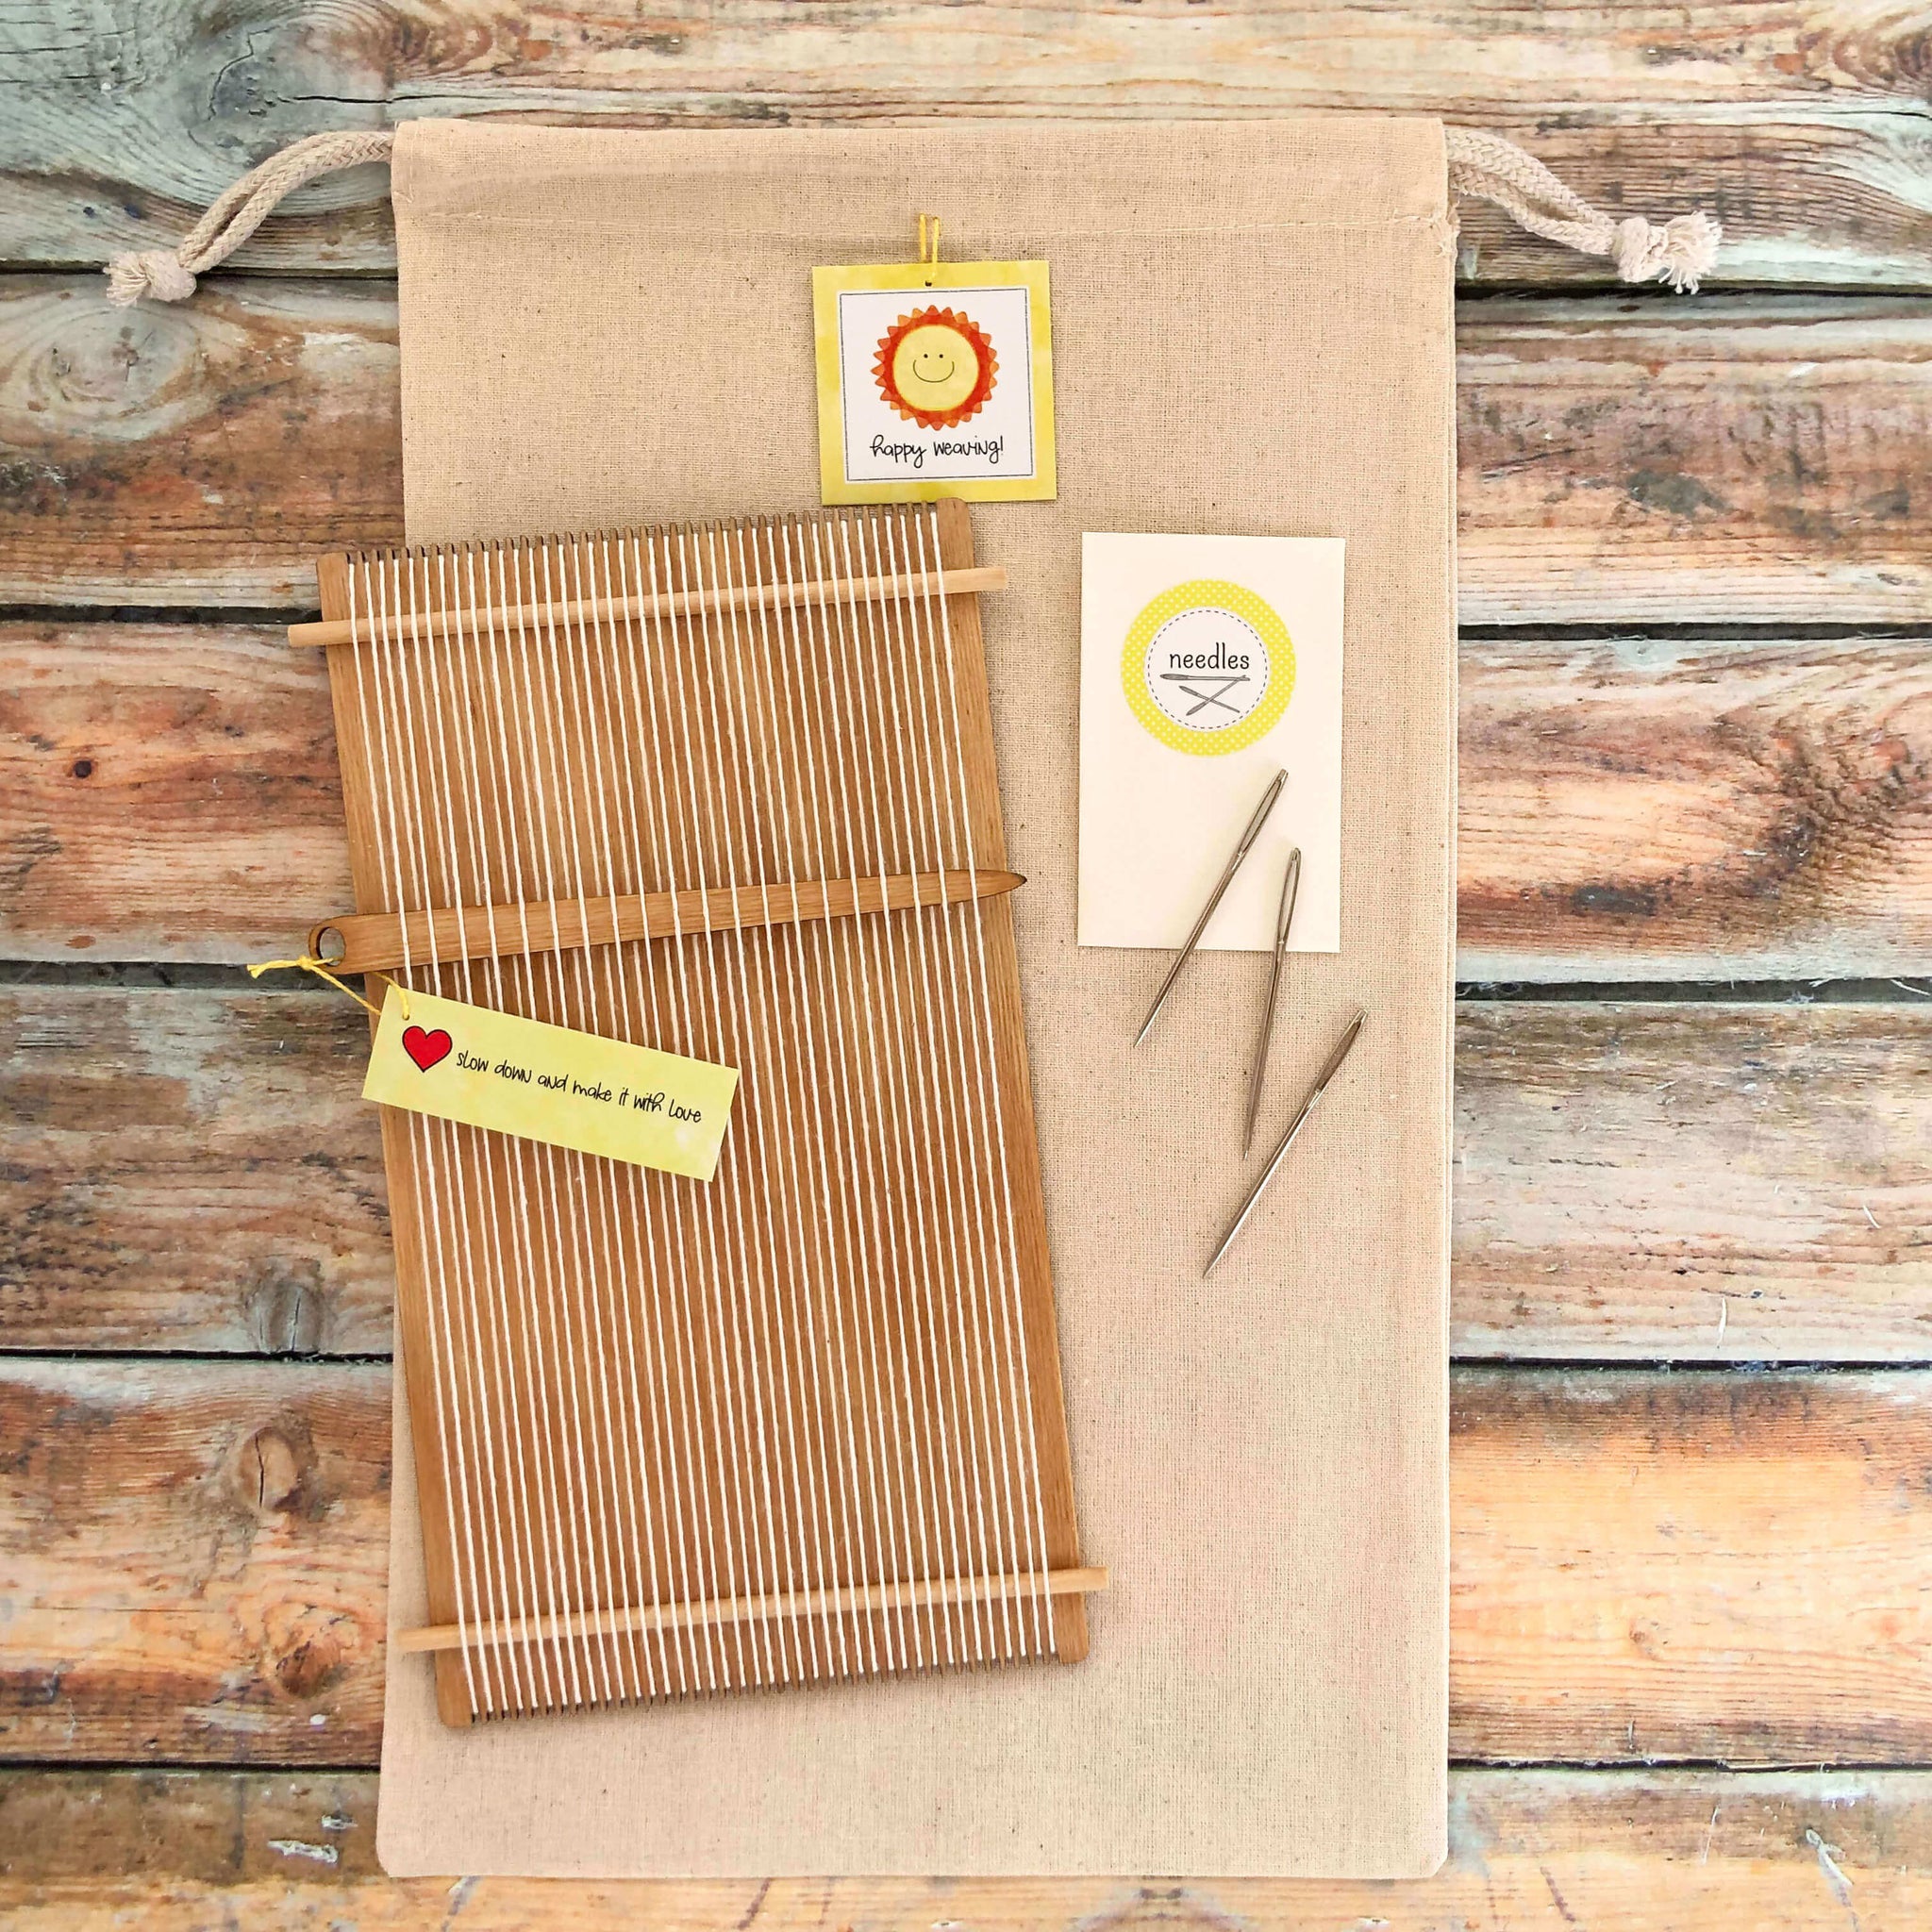 Tiny Wooden Loom Kits - The Creativity Patch - Lucy Jennings